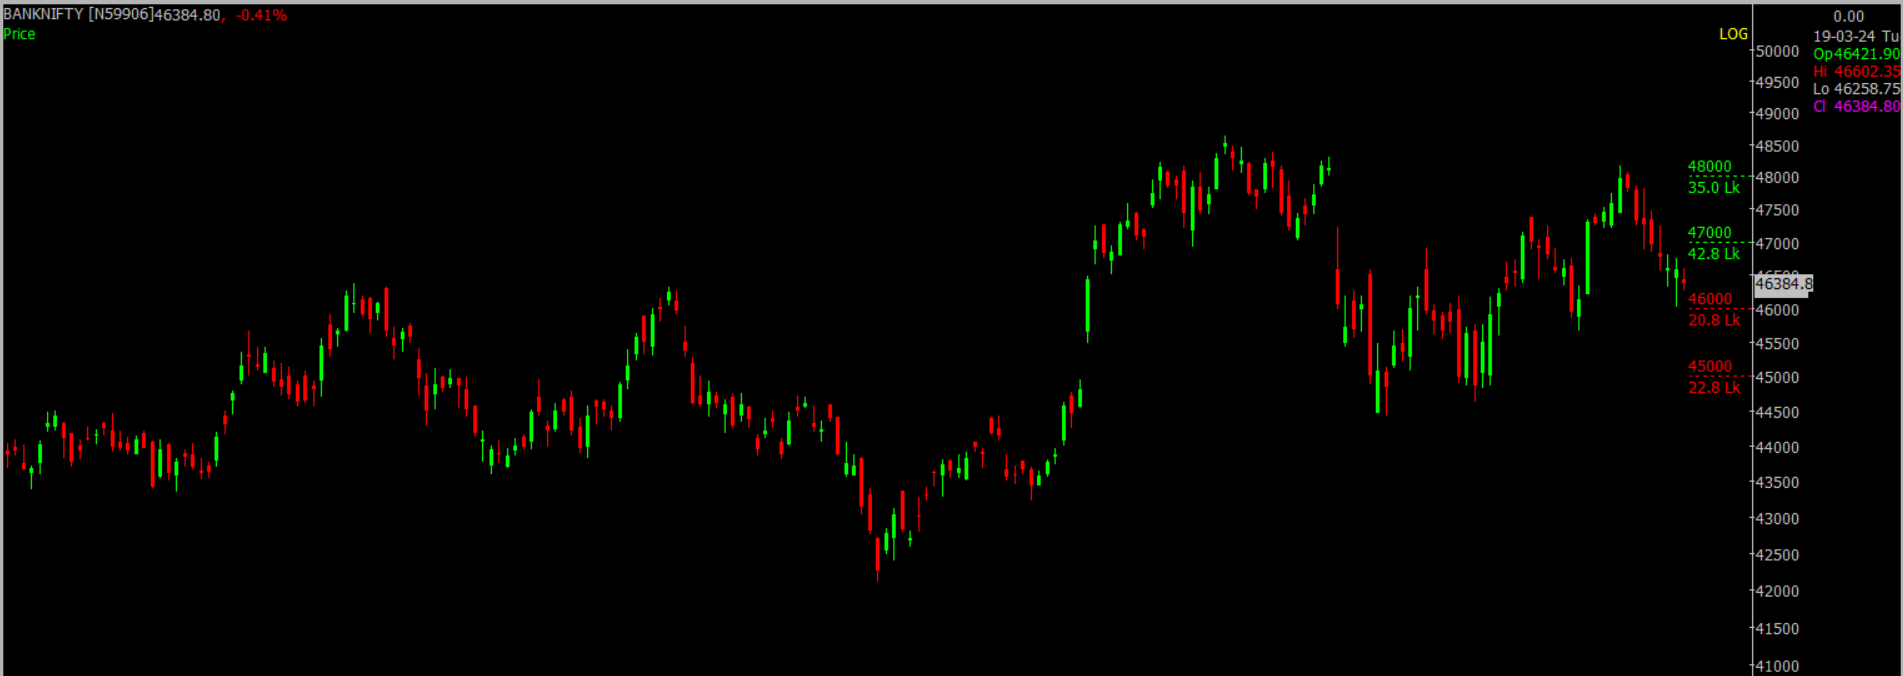 The picture is of the Bank Nifty Stock Market chart in the daily time frame, used for forcasting the market on March 20, 2024.
